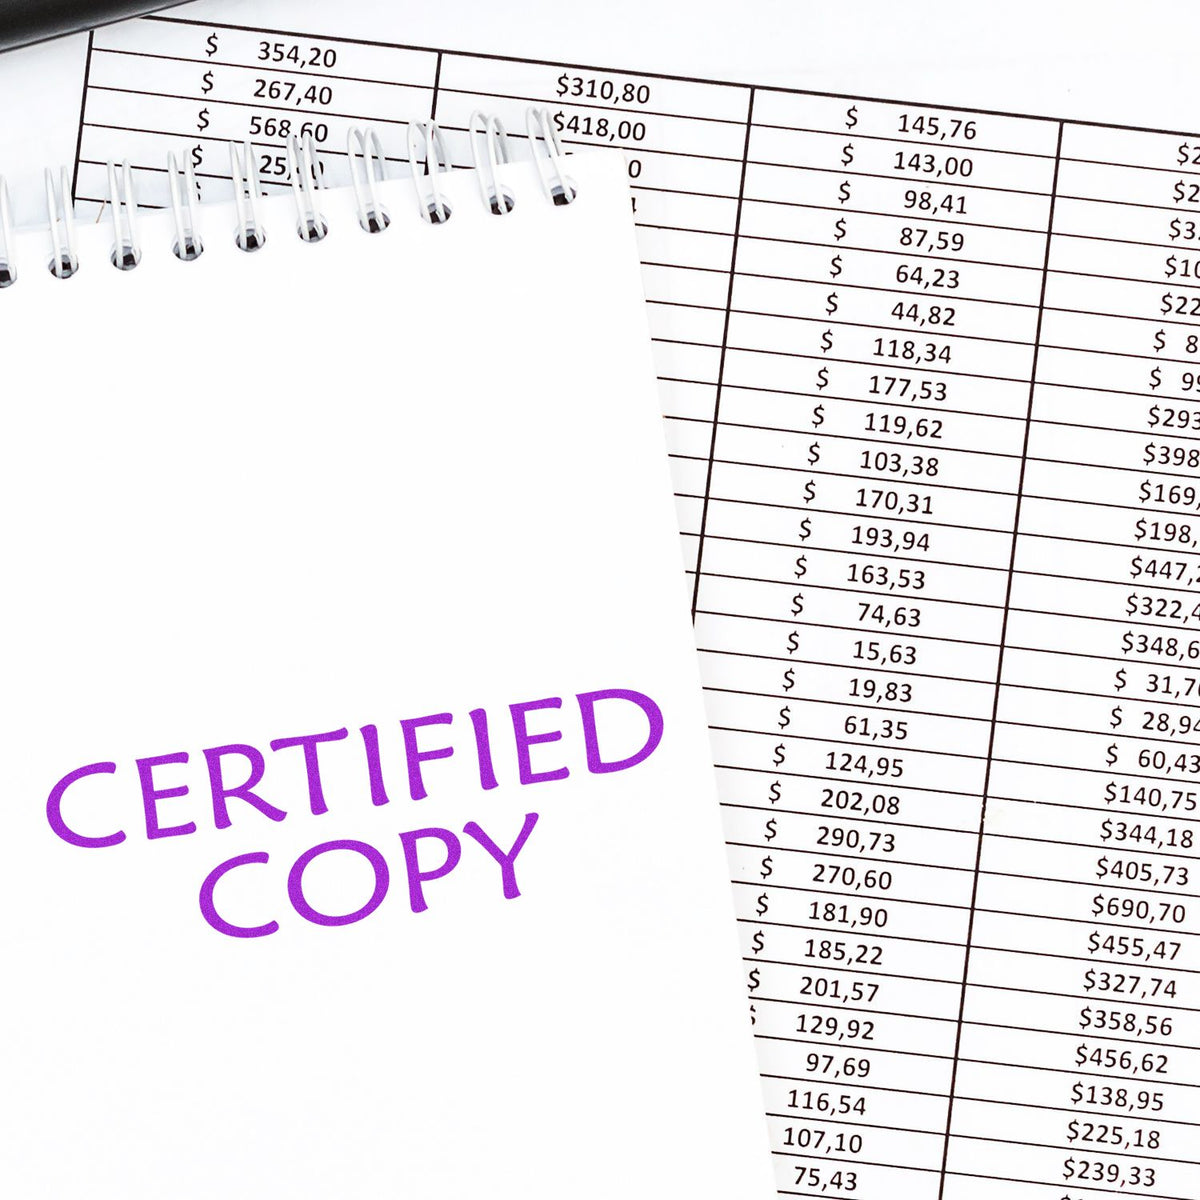 Large Self-Inking Certified Copy Stamp In Use